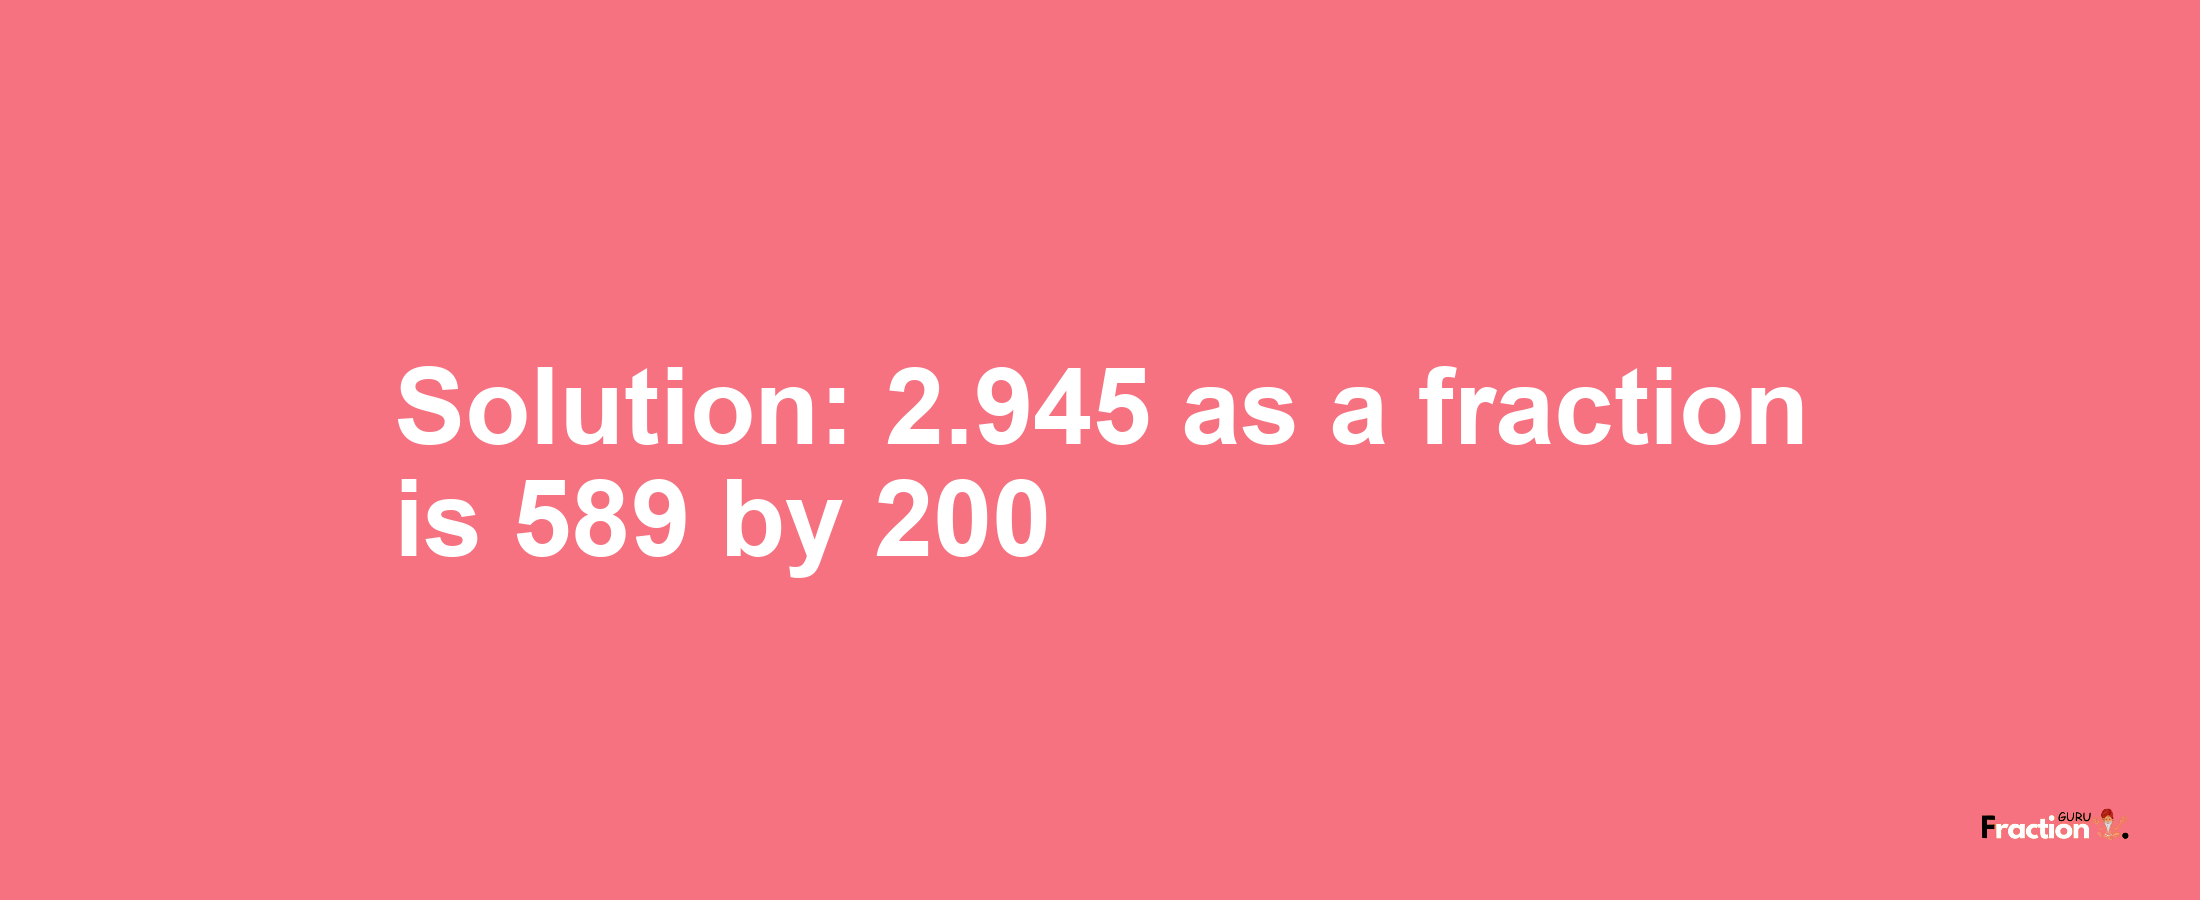 Solution:2.945 as a fraction is 589/200